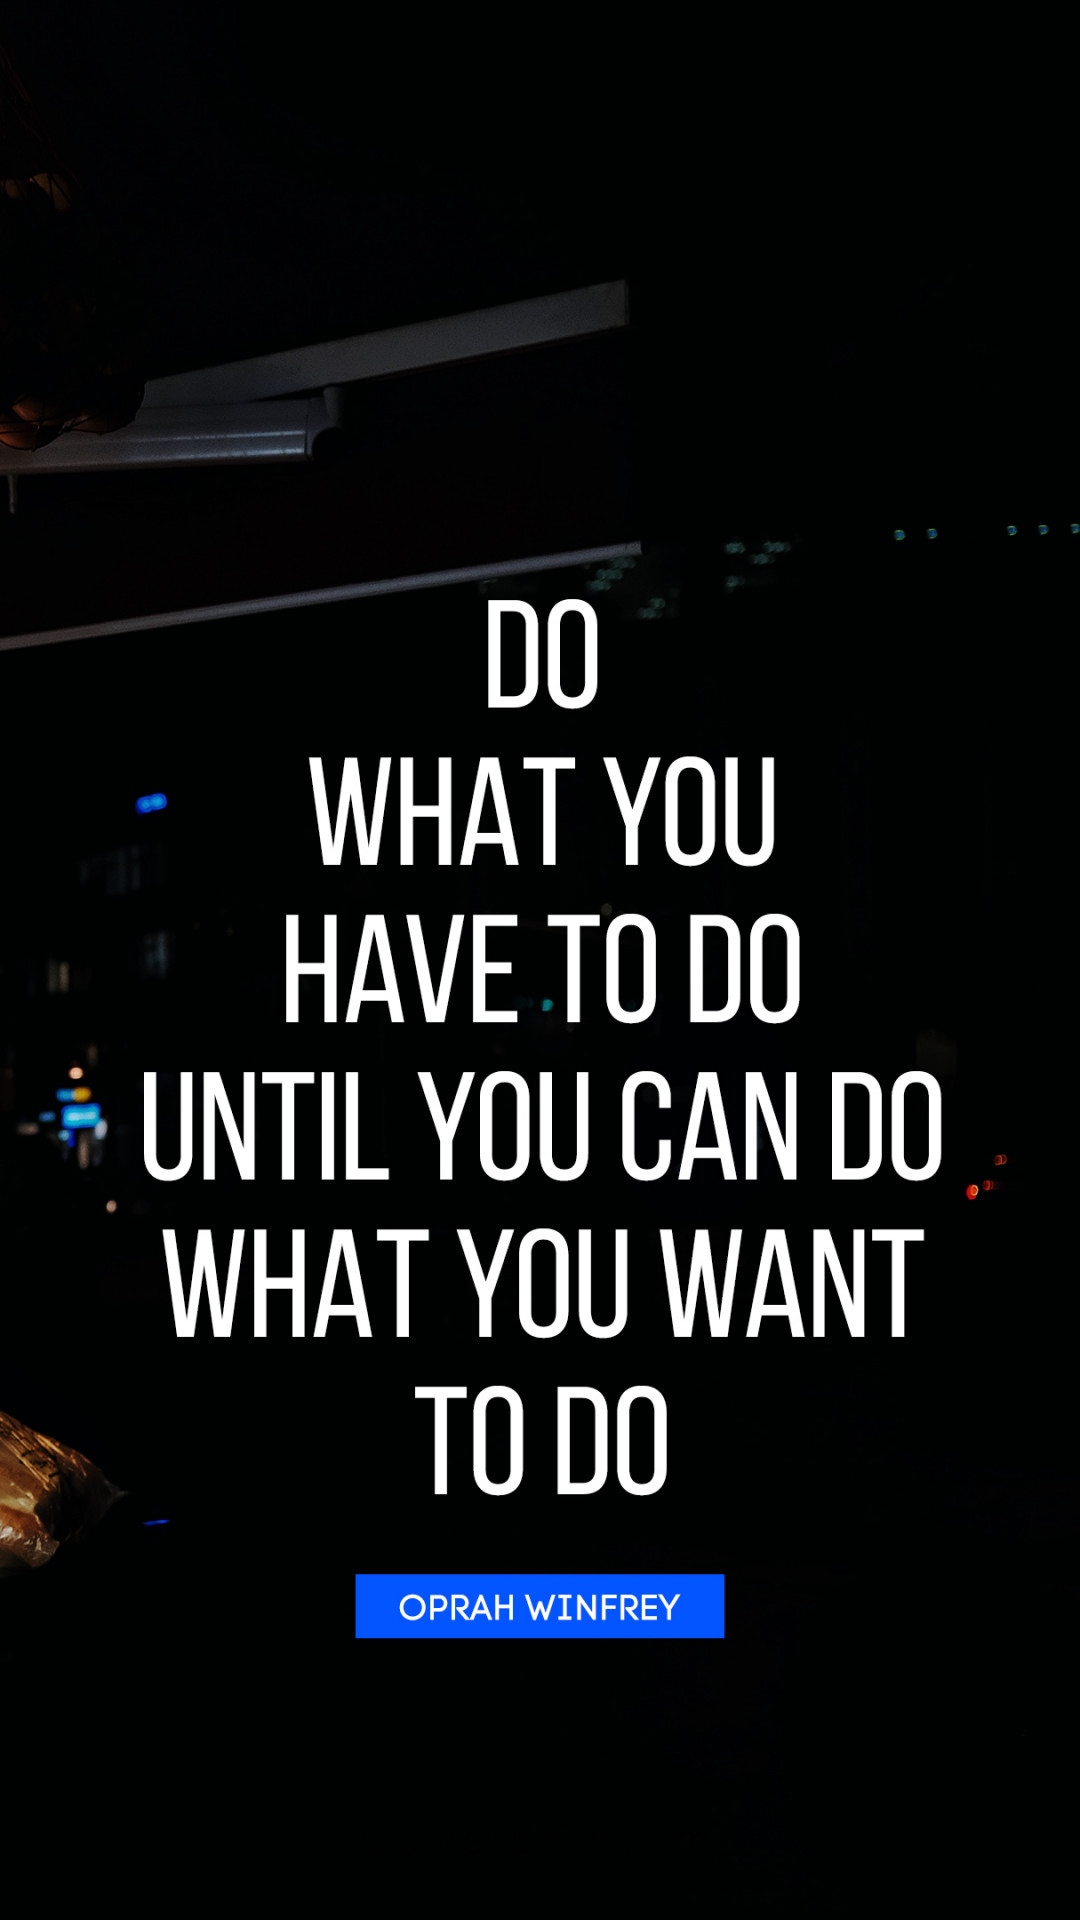 Do what you have to do until you can do what you want to do. - Quote by